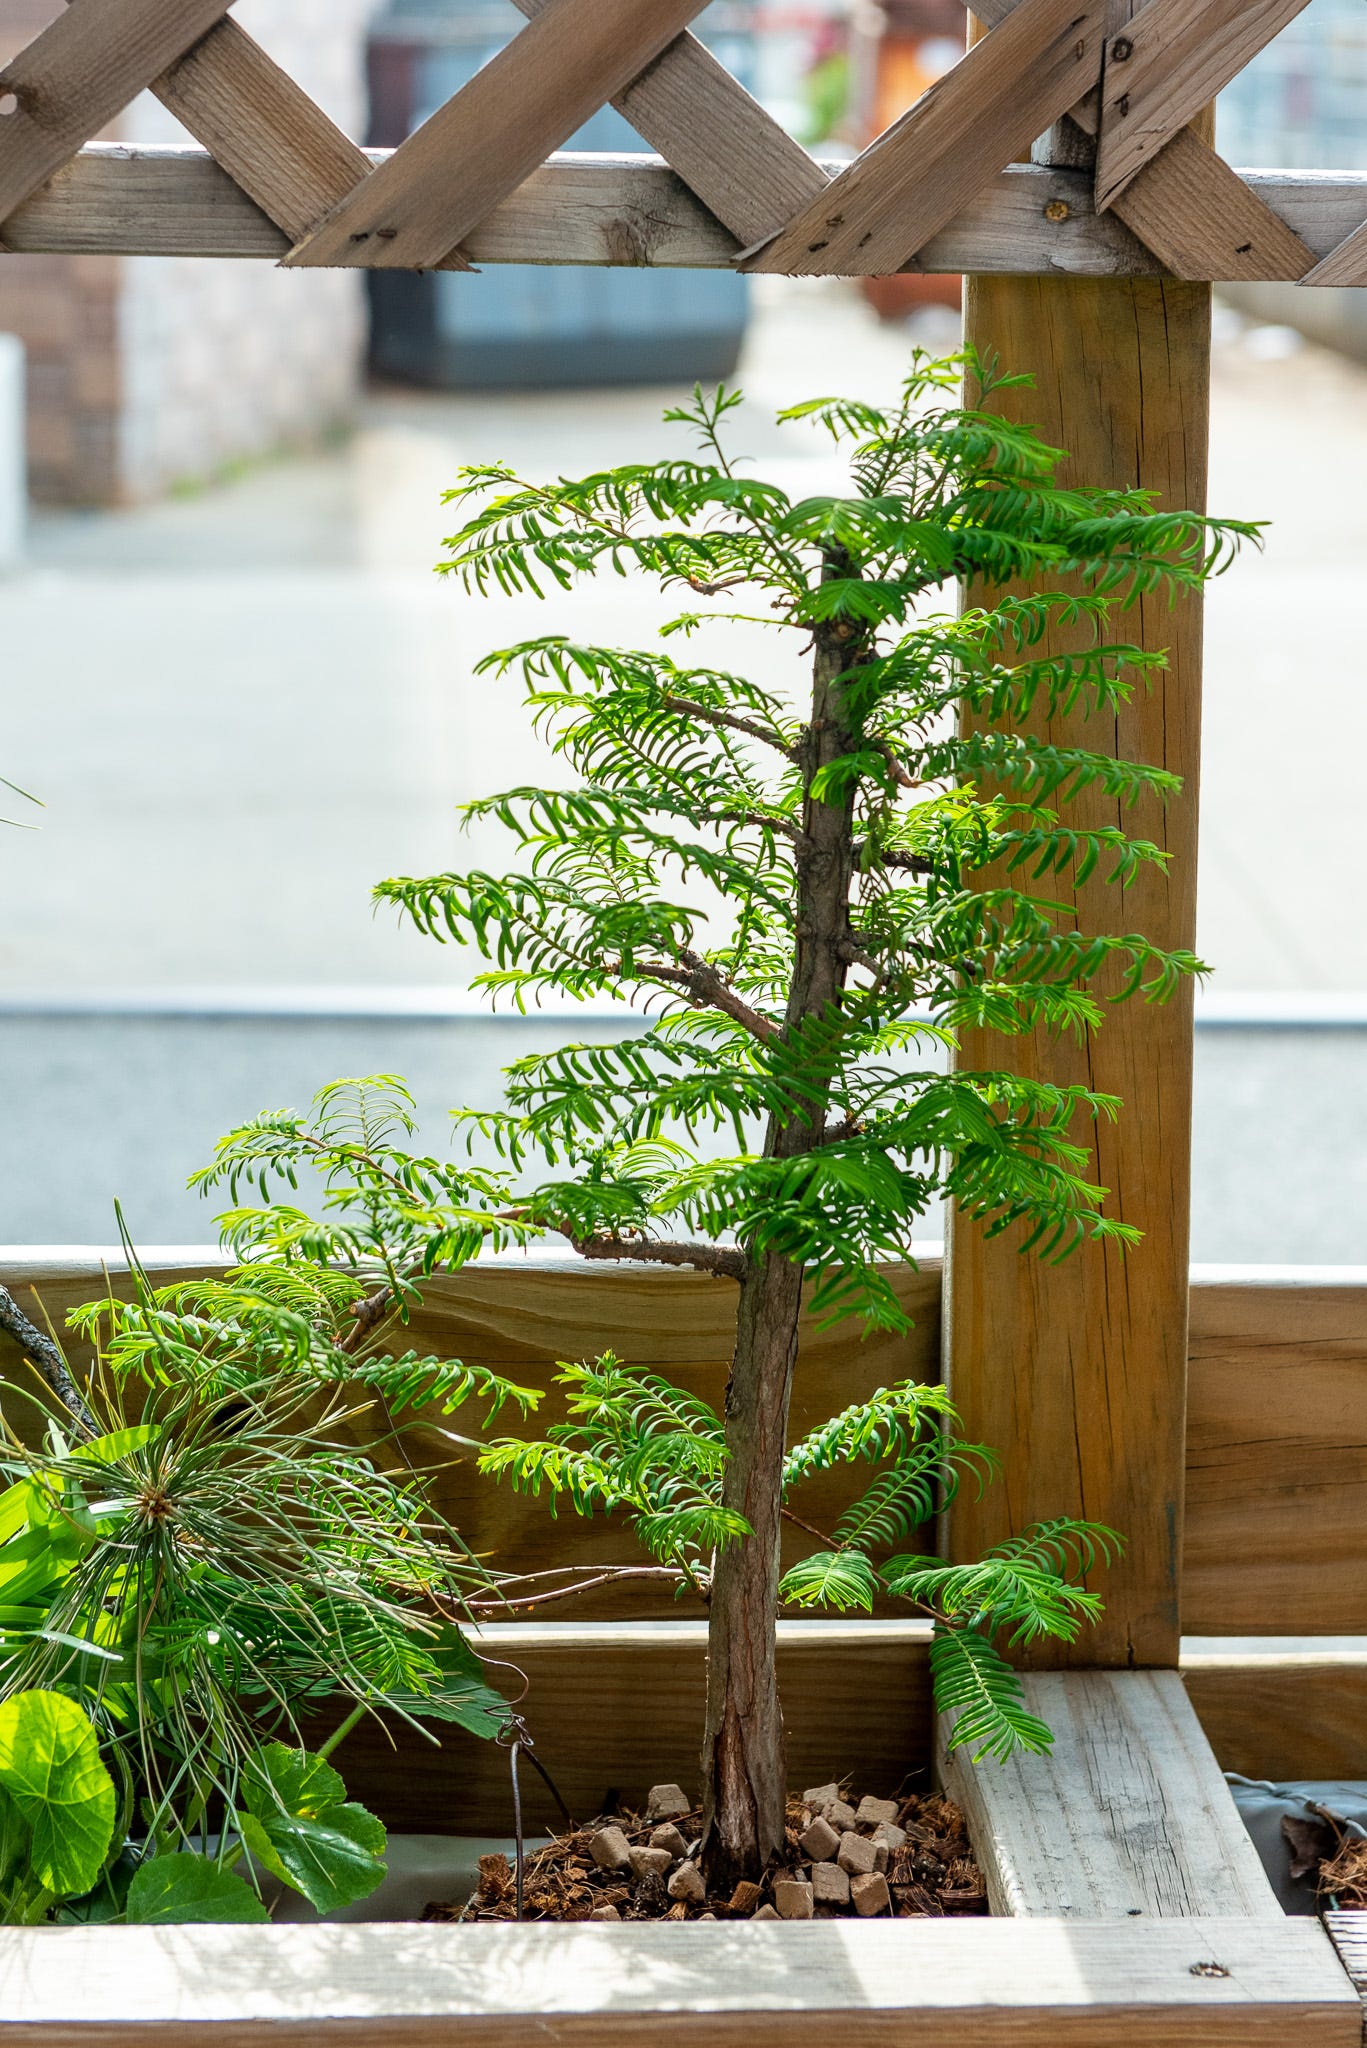 ID: Photo of upright dawn redwood tree planted in its restaurant planter, bushy with new growth.